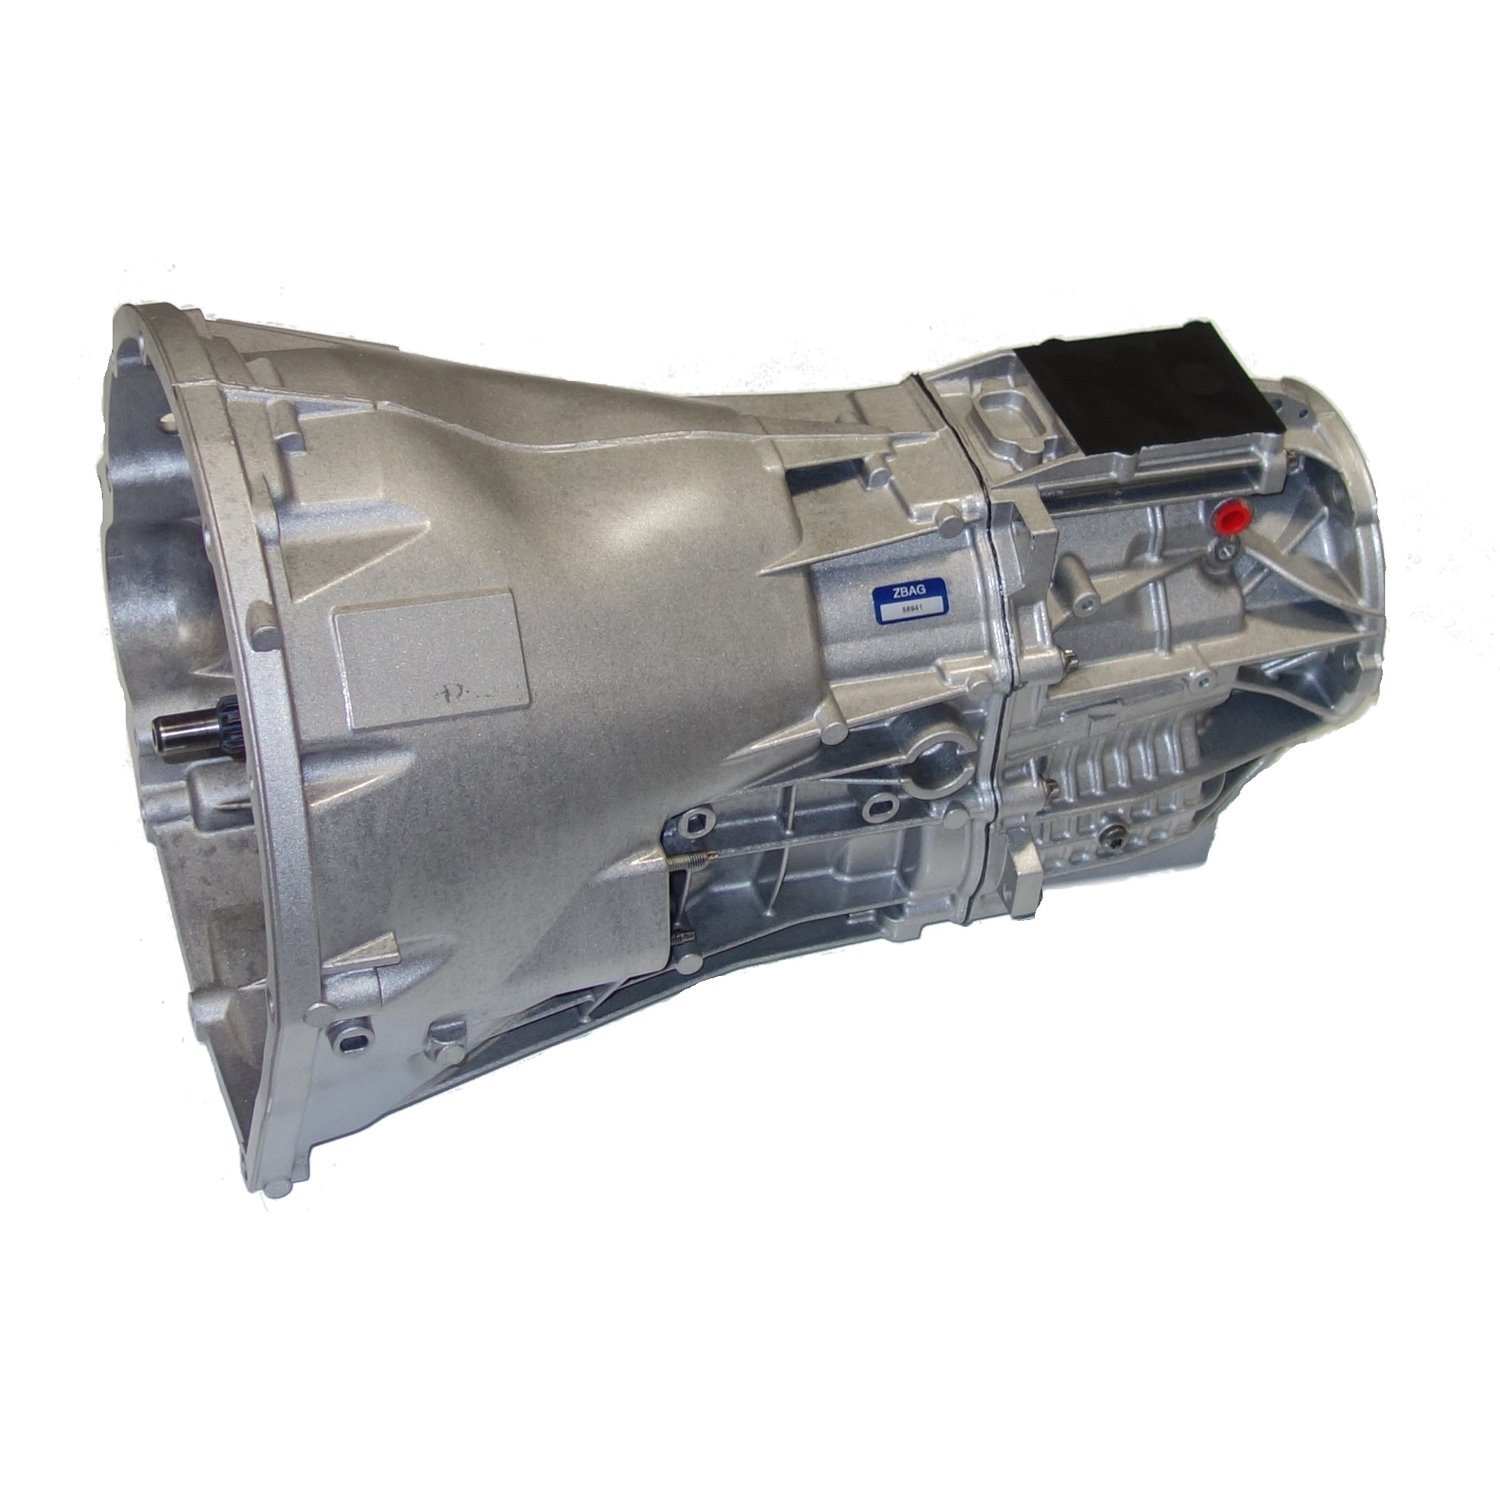 Remanufactured NSG370 Manual Transmission for 2005-08 Liberty, 07-08 Nitro 3.7L, 6 Speed, 2WD